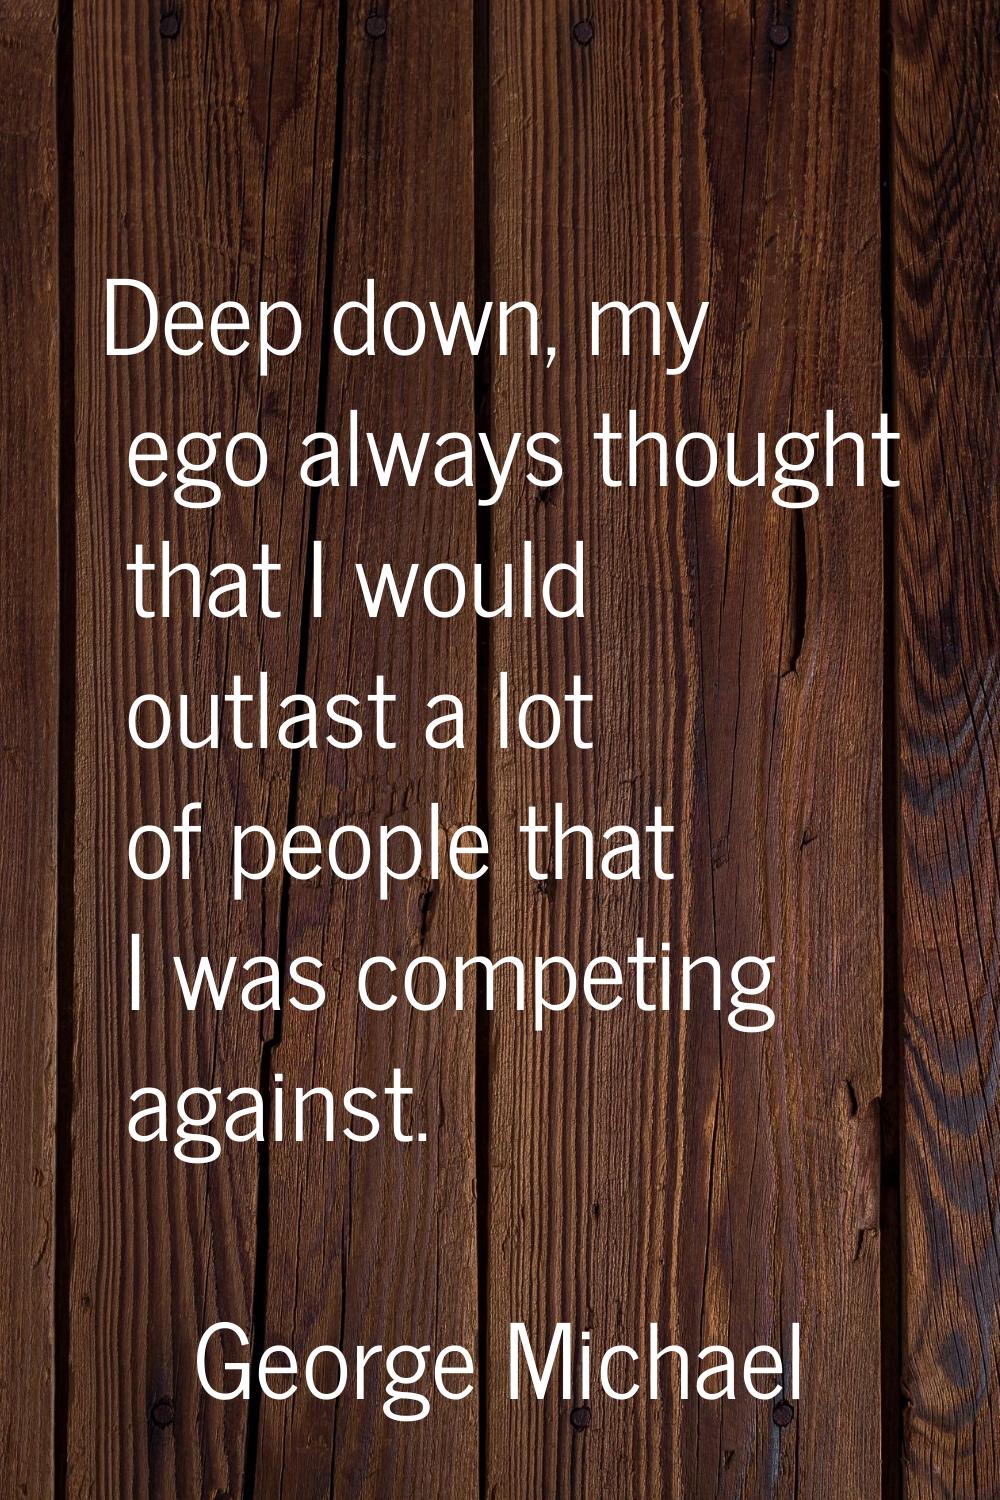 Deep down, my ego always thought that I would outlast a lot of people that I was competing against.